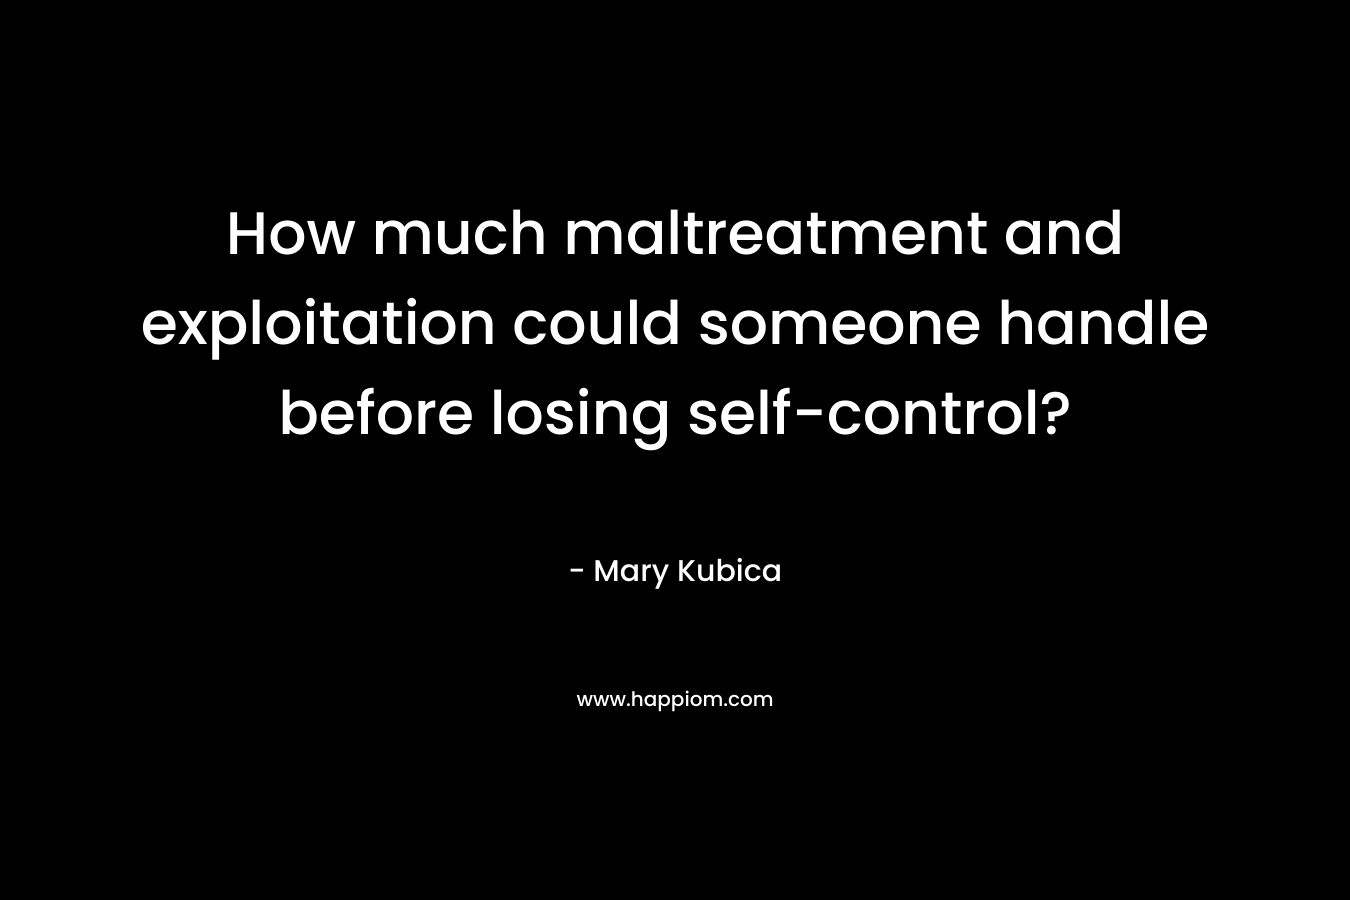 How much maltreatment and exploitation could someone handle before losing self-control? – Mary Kubica